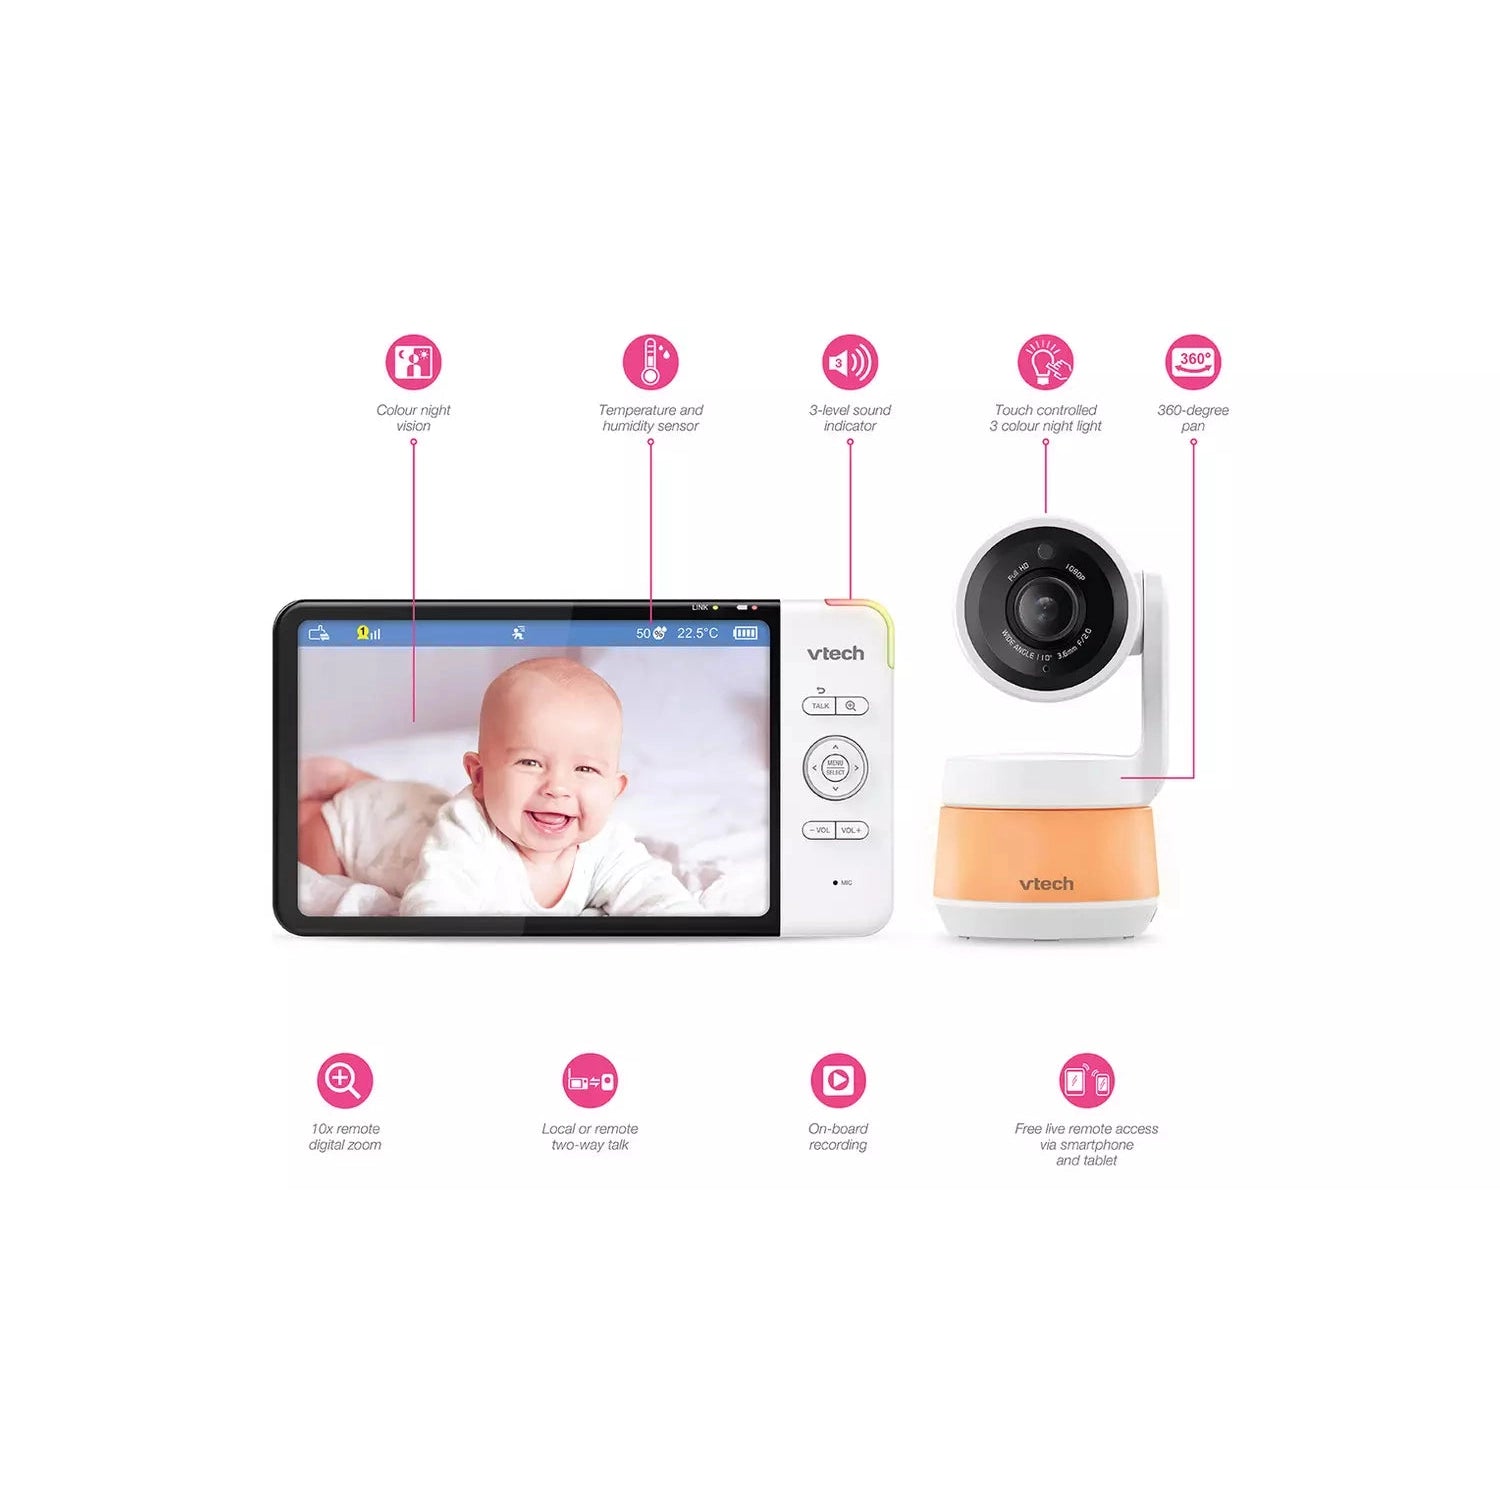 VTech RM7767HD Smart Video Baby Monitor - White - Refurbished Excellent